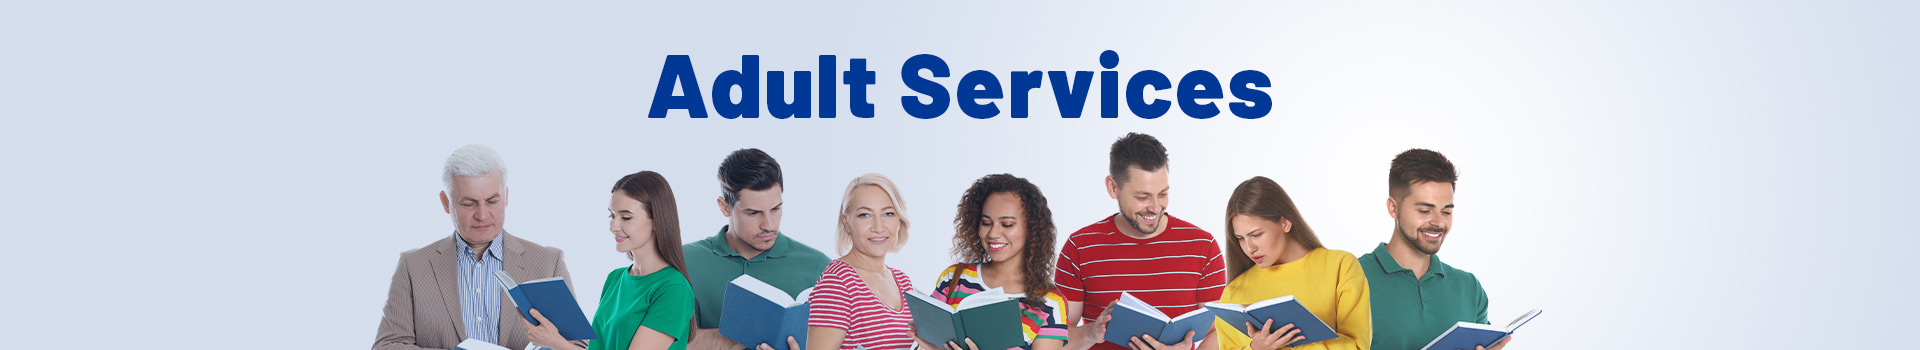 Adult Services at Atchison Public Library